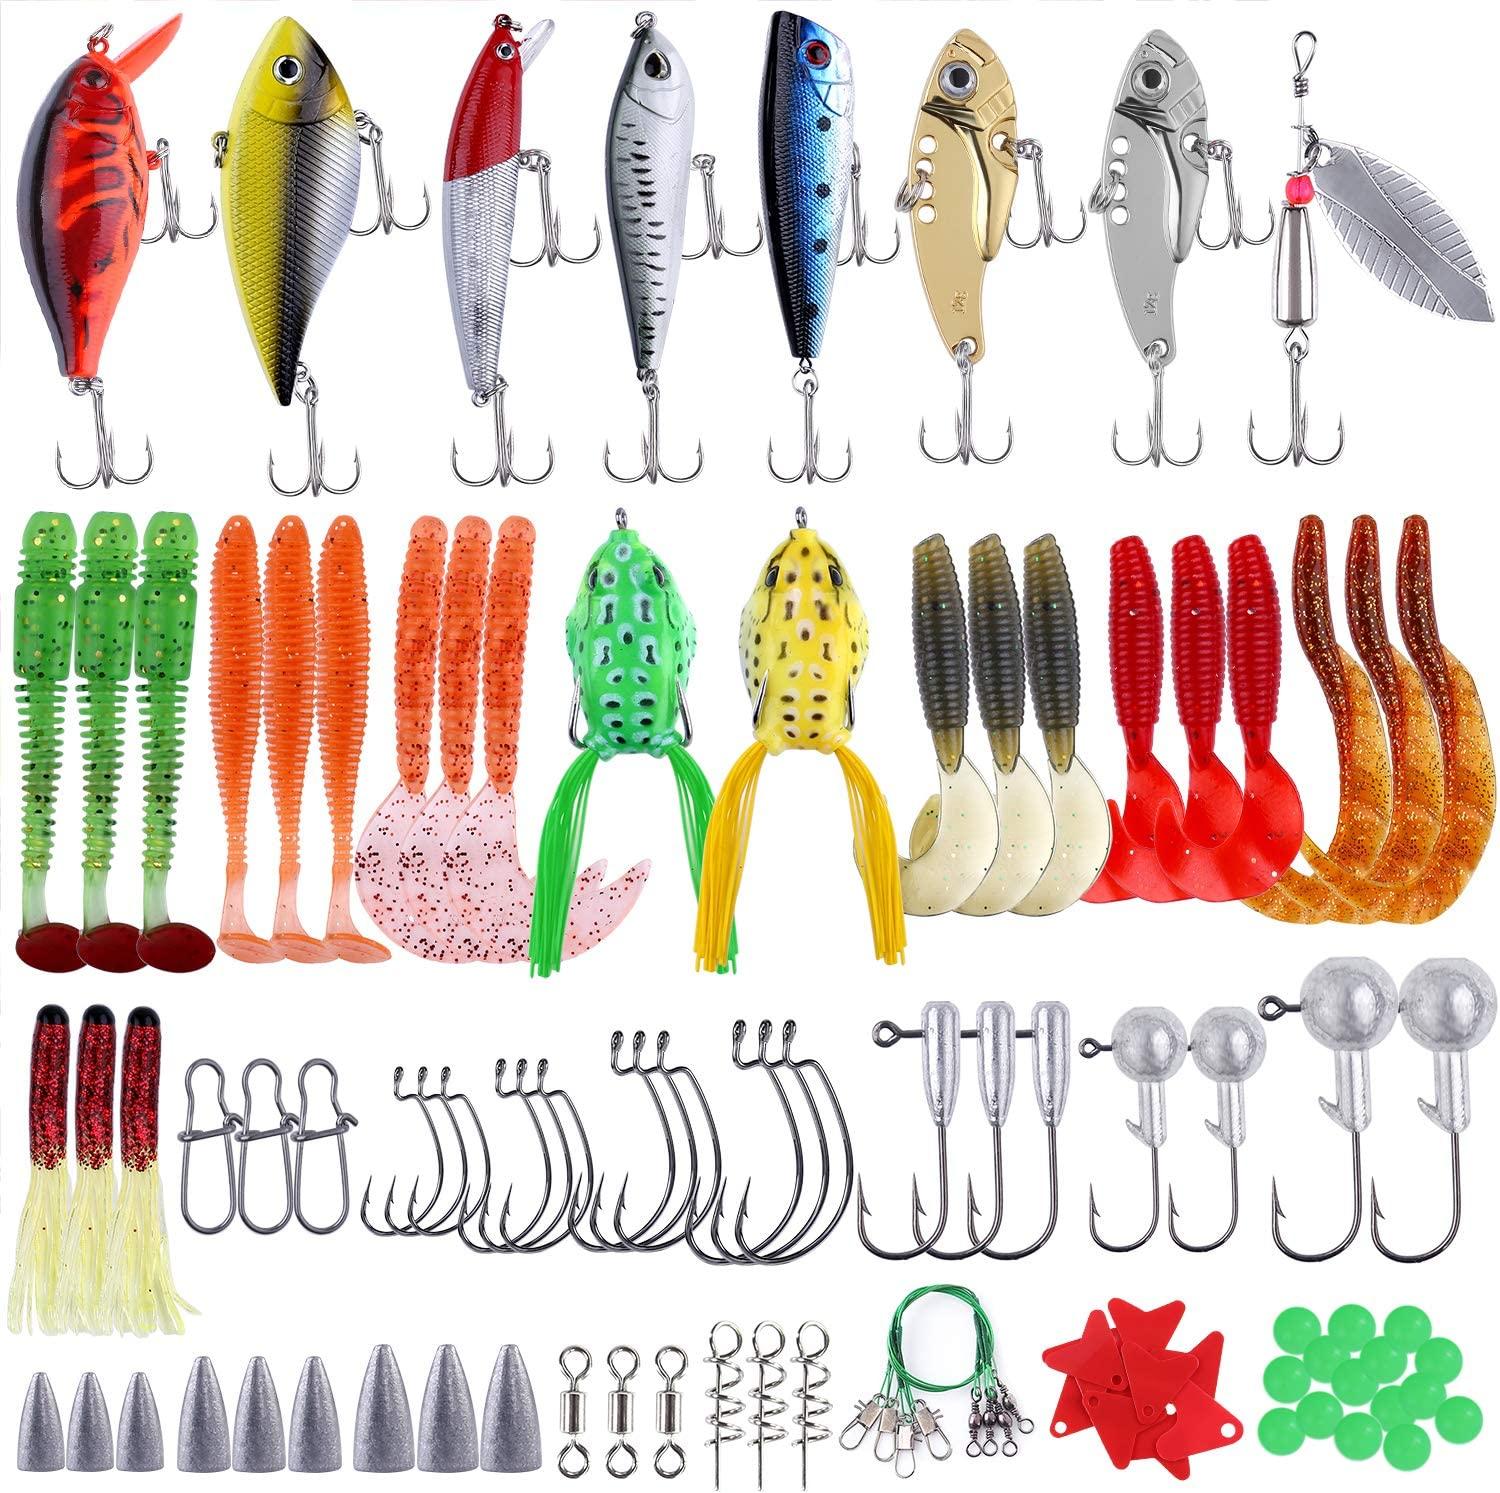  PLUSINNO 108PCS Fishing Accessories Kit Including Crankbaits,  Spinnerbaits, Plastic Worms, Topwater Lures, Fishing Hooks, Fishing Weights  Sinkers and More Fishing Gear Lures Kit Set : Sports & Outdoors